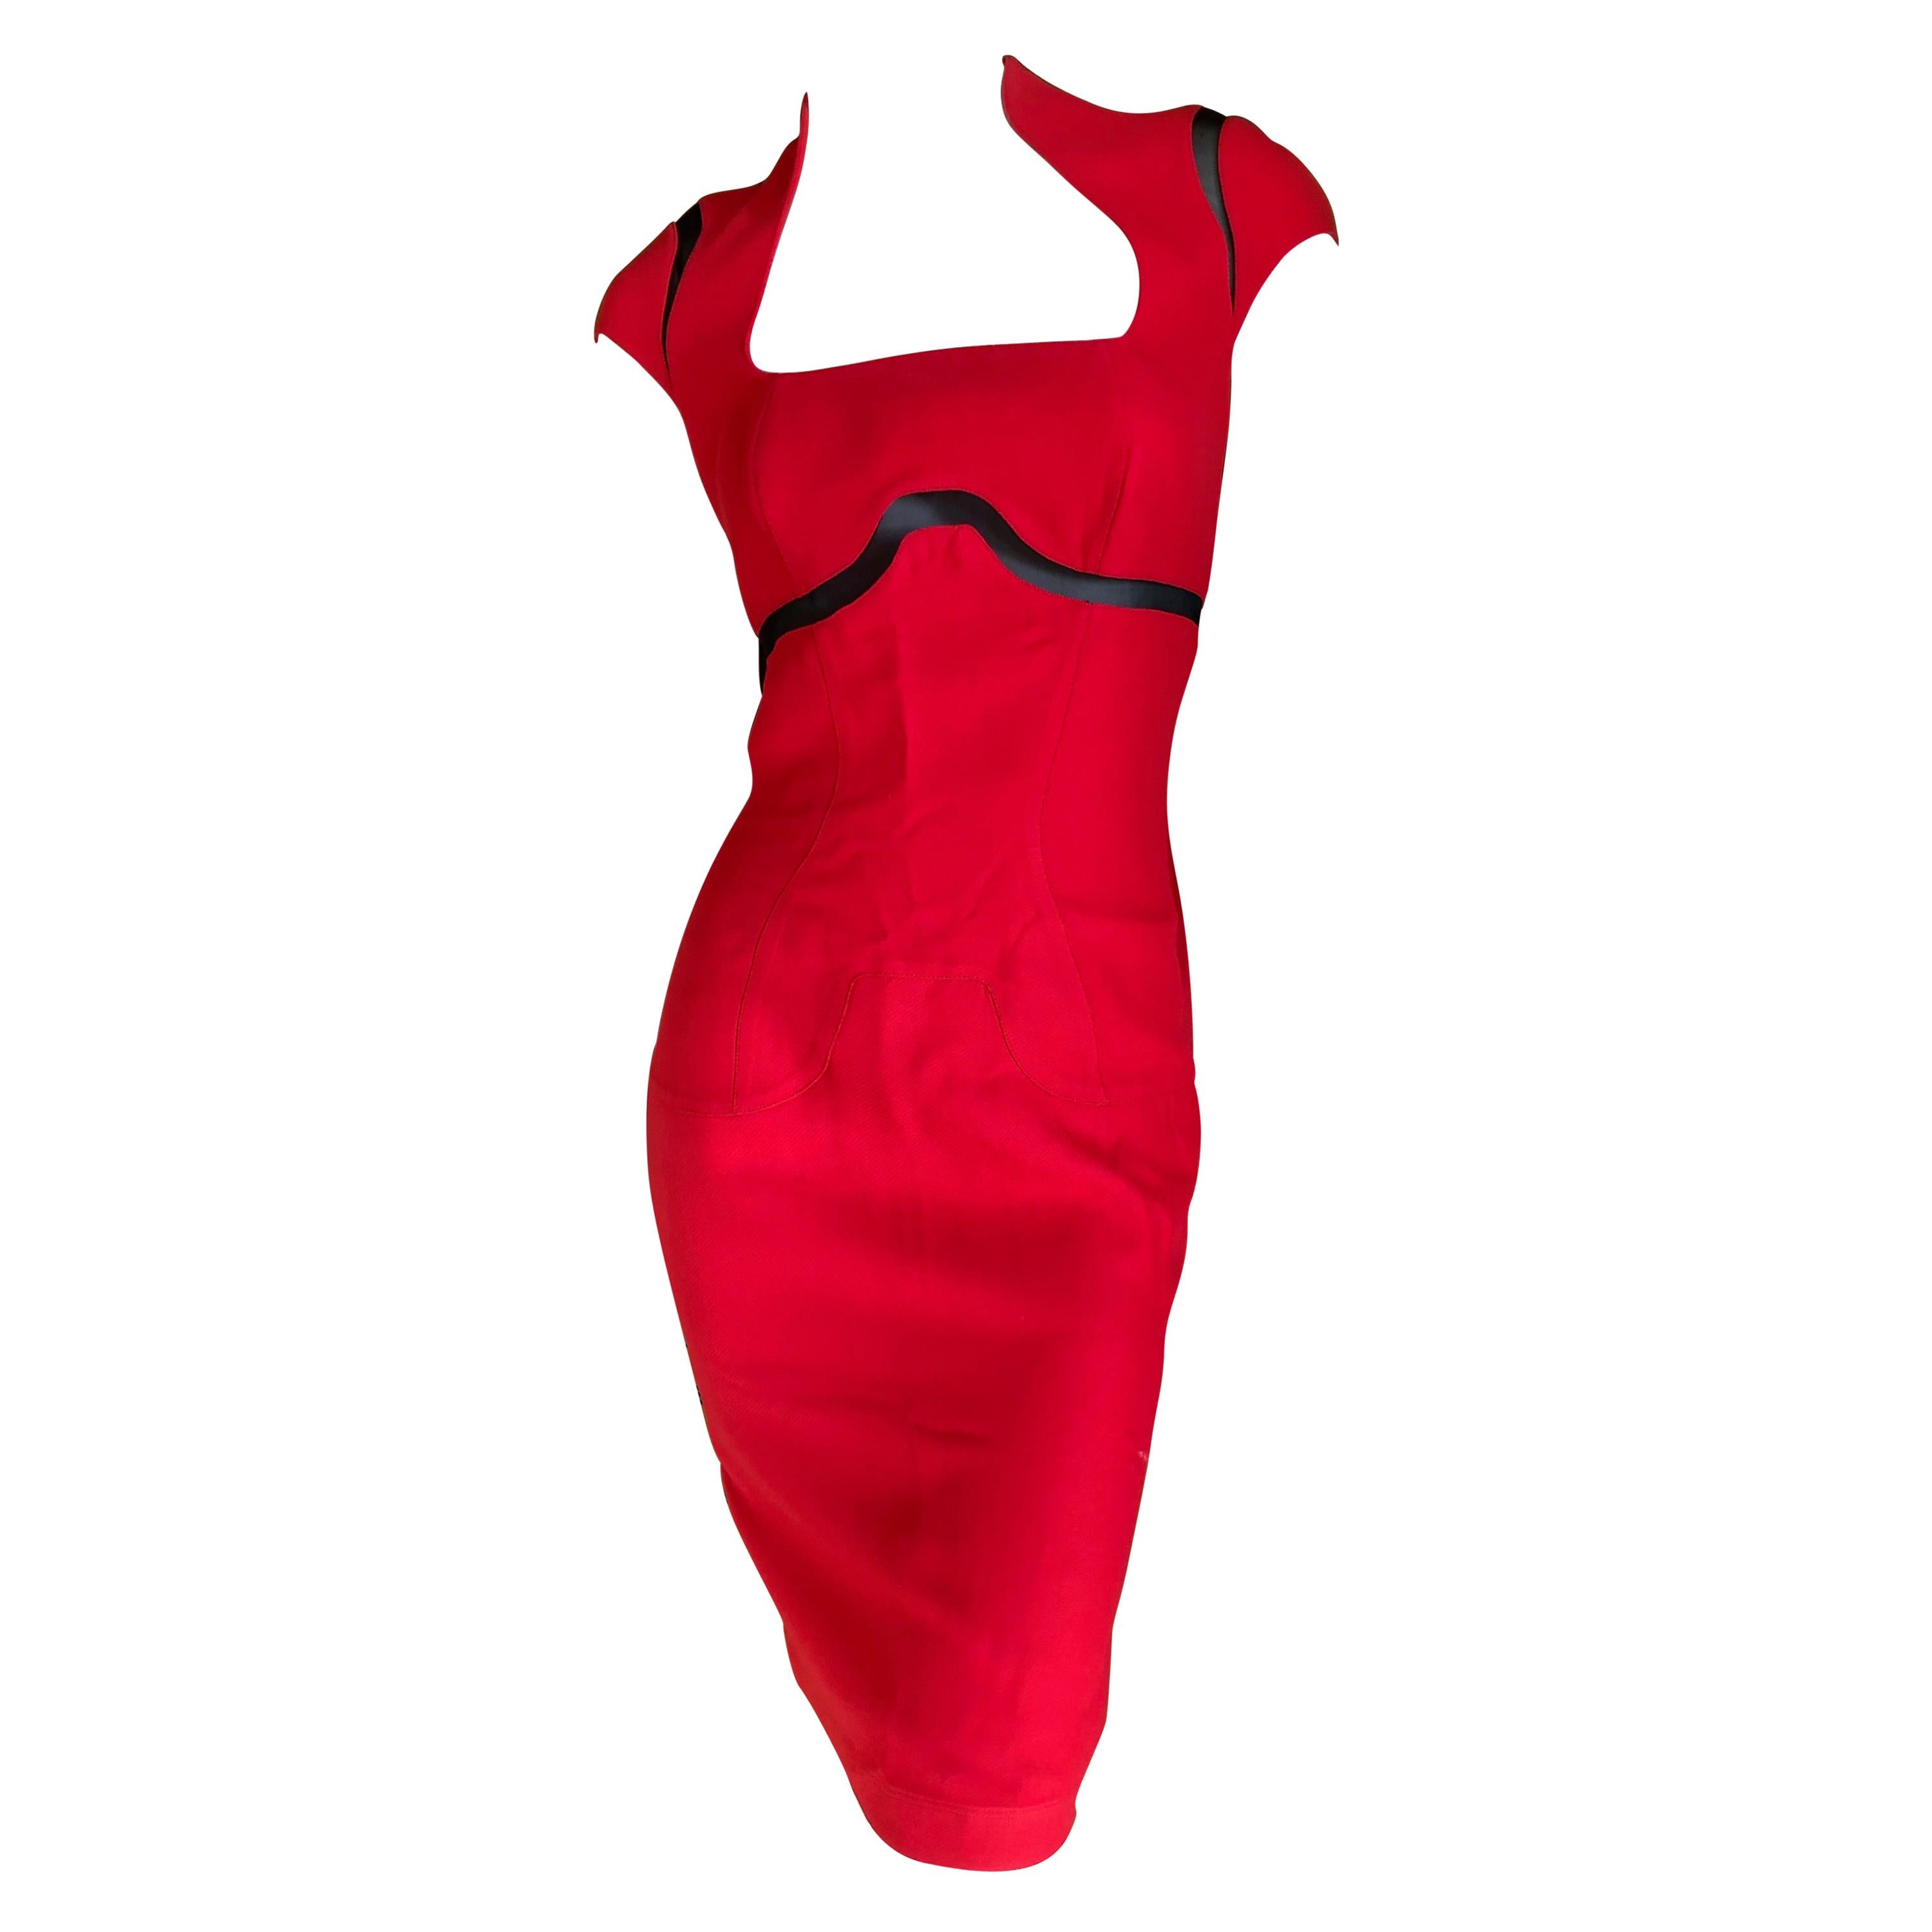 Thierry Mugler Vintage 1980's Red Cocktail Dress with Sheer Inserts For Sale